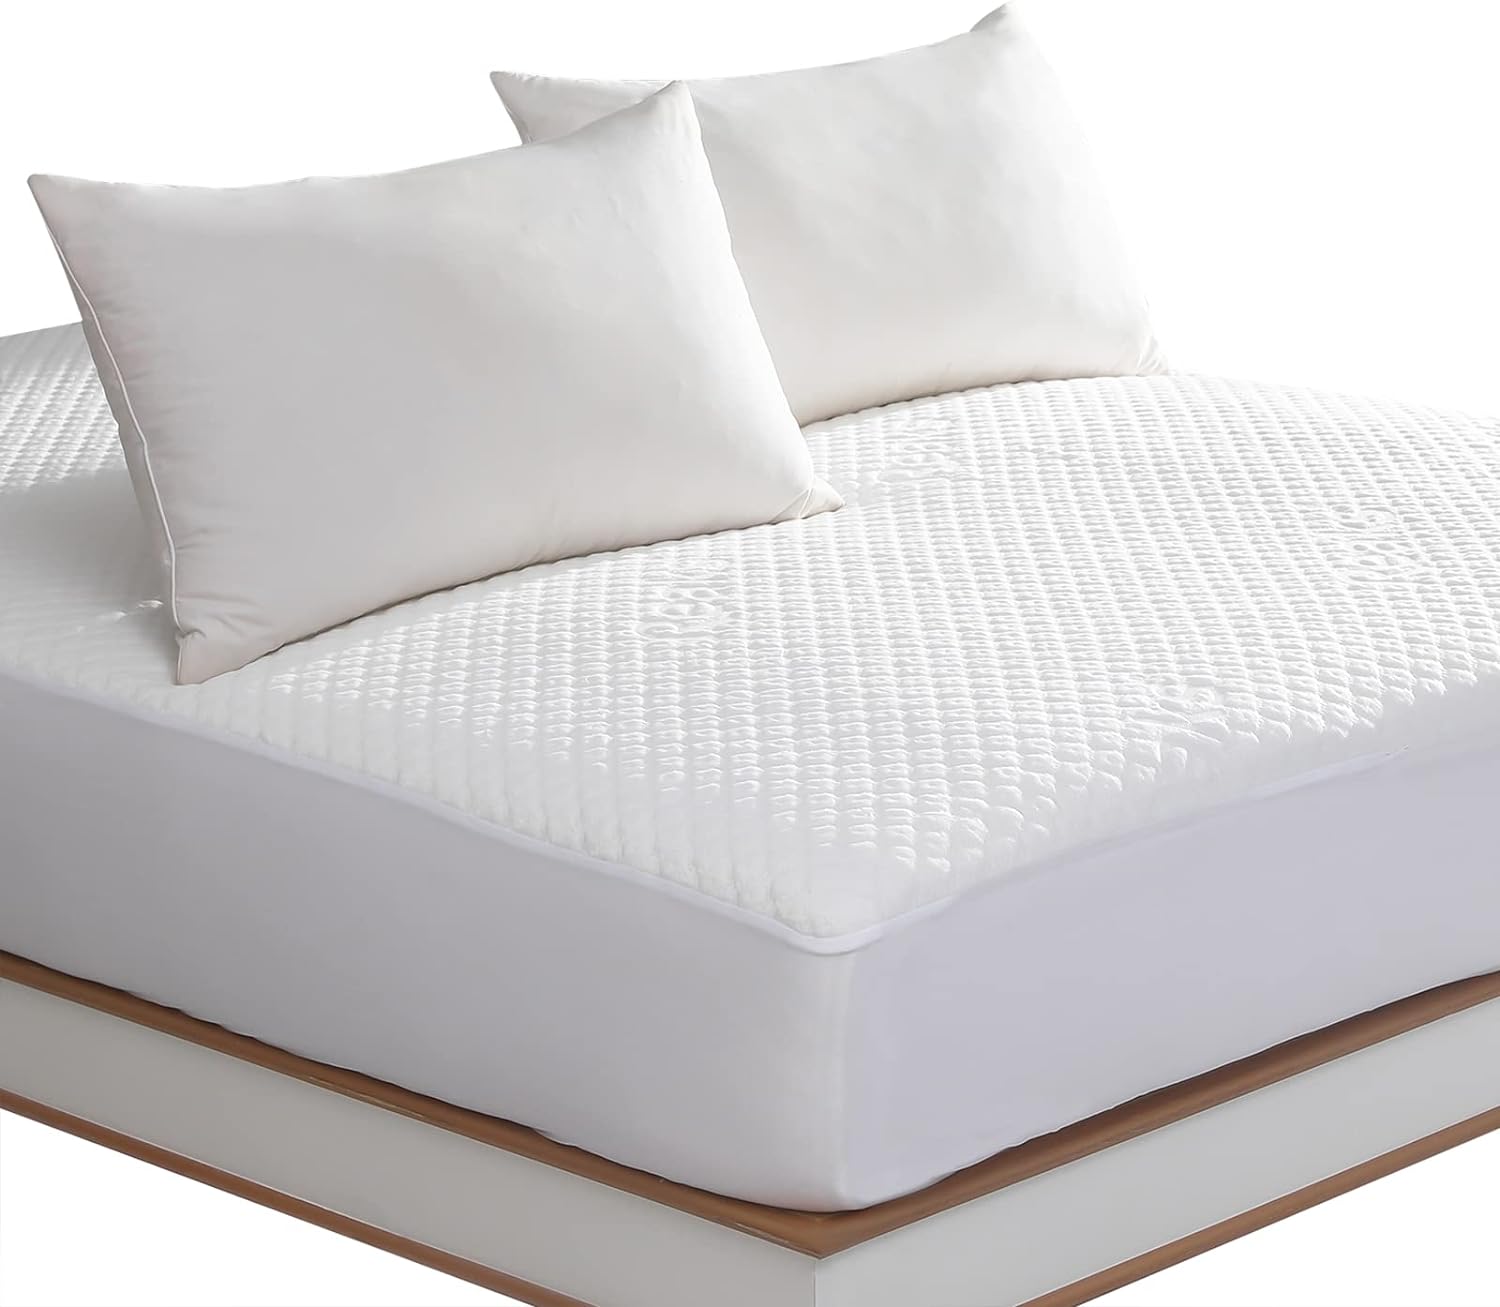 I've been on the hunt for a mattress protector that doesn't turn my bed into a sauna, and I hit the jackpot with this bamboo mattress protector. No more waking up in a puddleit keeps me cool all night. The bamboo material is a game-changer, soaking up moisture without making me feel hot and bothered. Plus, it' surprisingly soft and durable. If you're tired of the sweaty struggle, this protector is a real sleep-saver. Highly recommend for a comfier, cooler night' sleep!